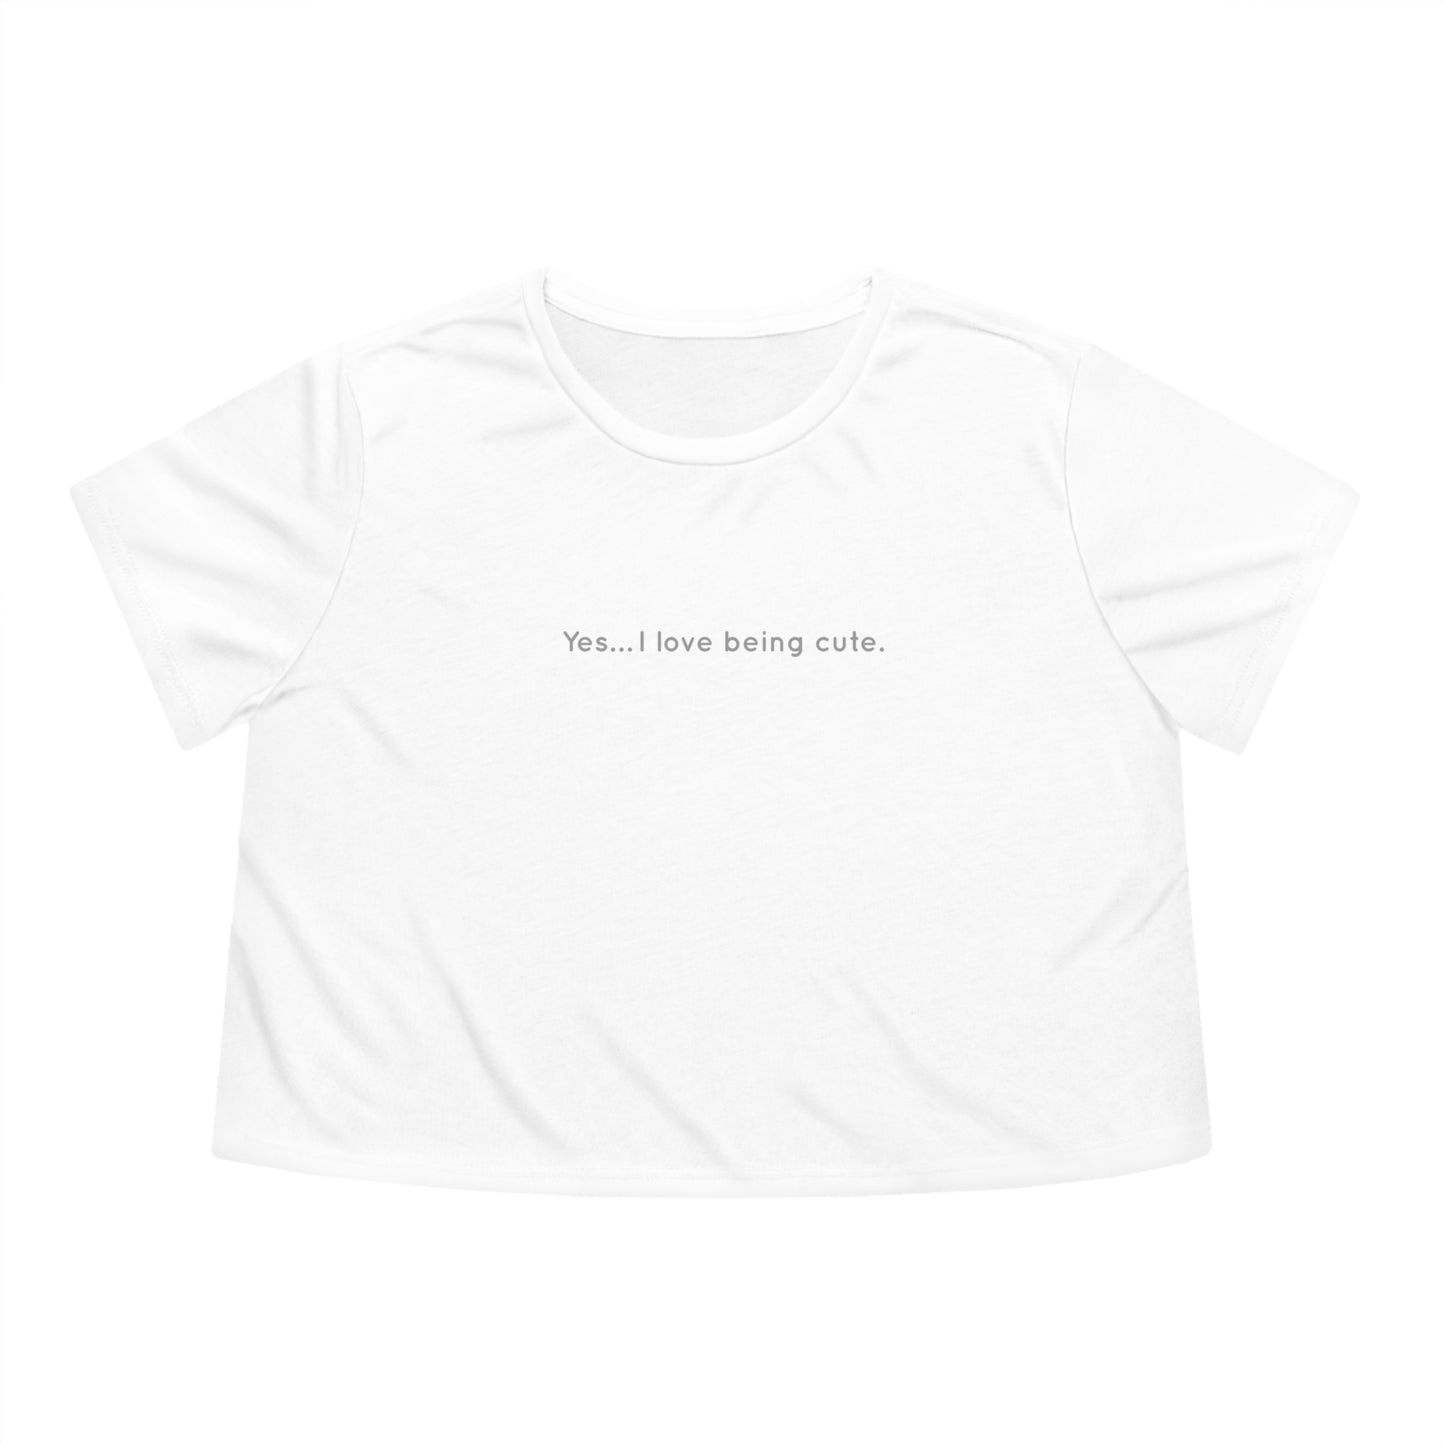 "Yes… I love being cute." - Cropped Tee